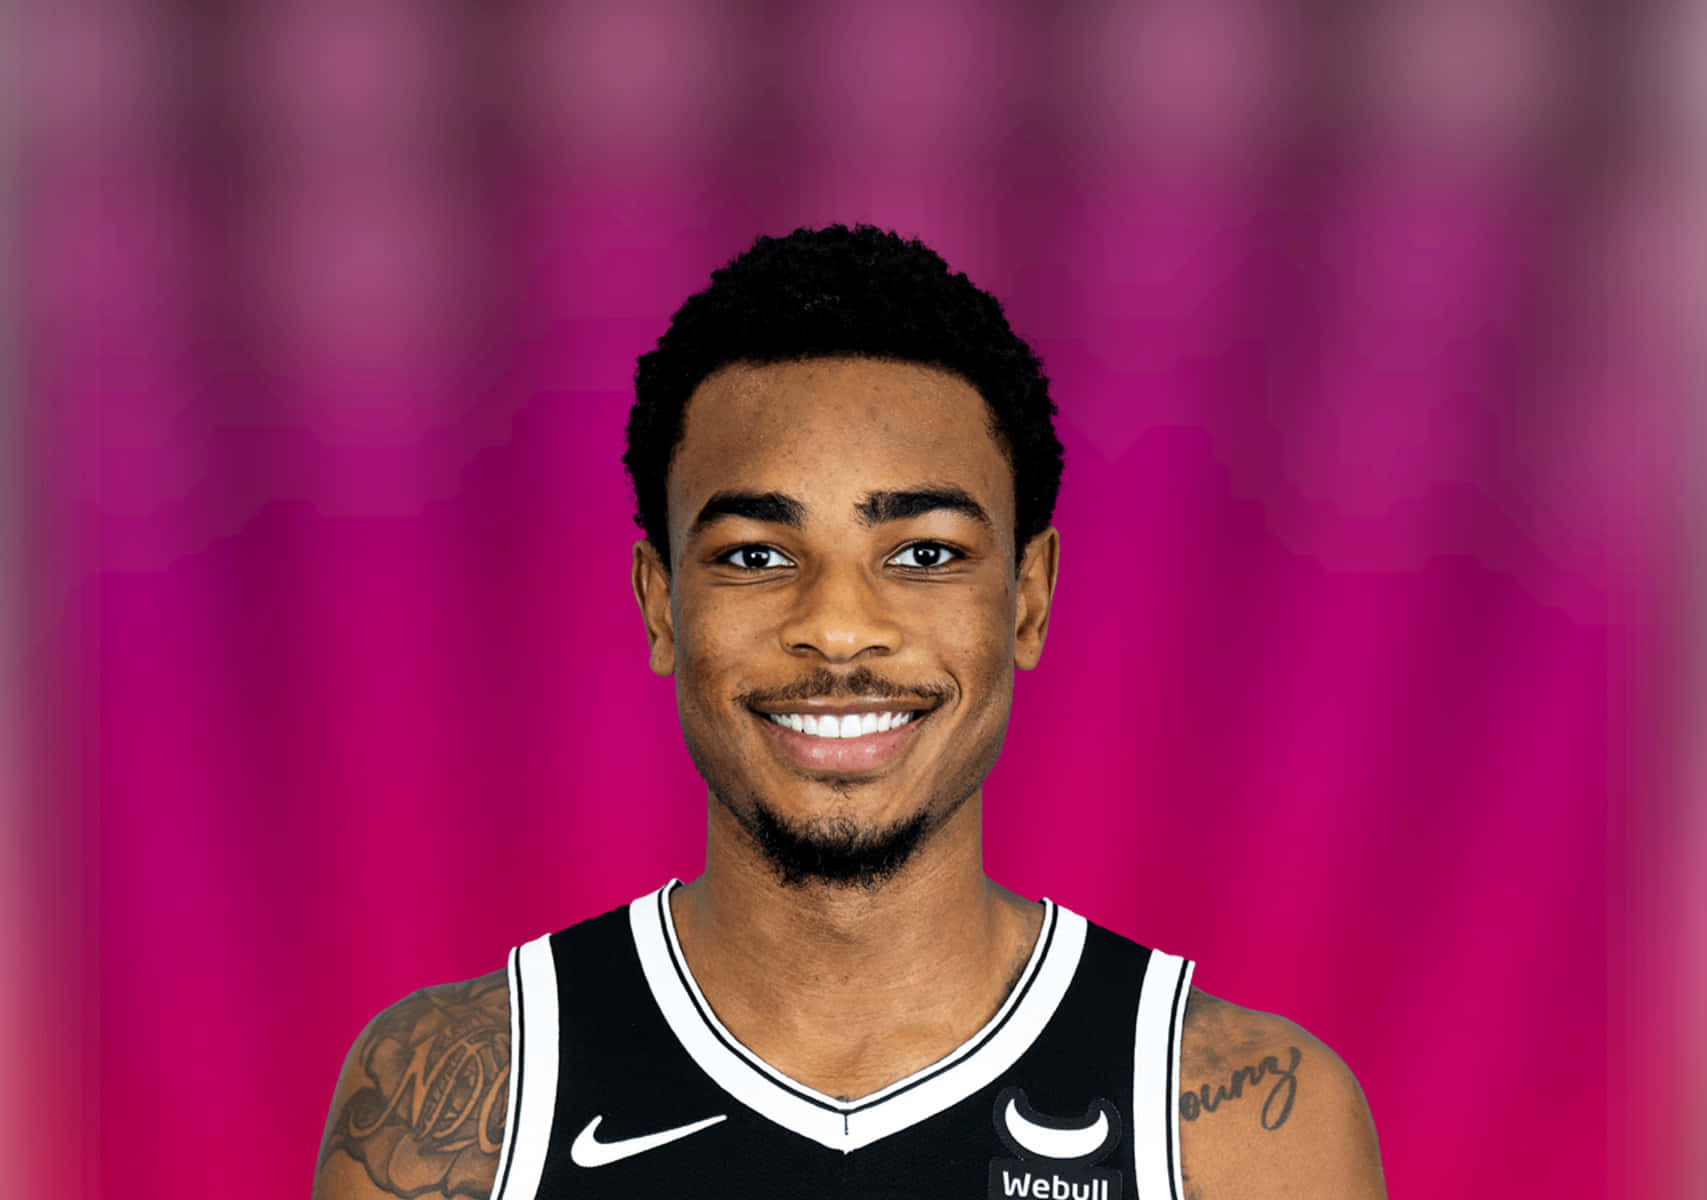 Basketball Player Smiling Against Pink Background Wallpaper